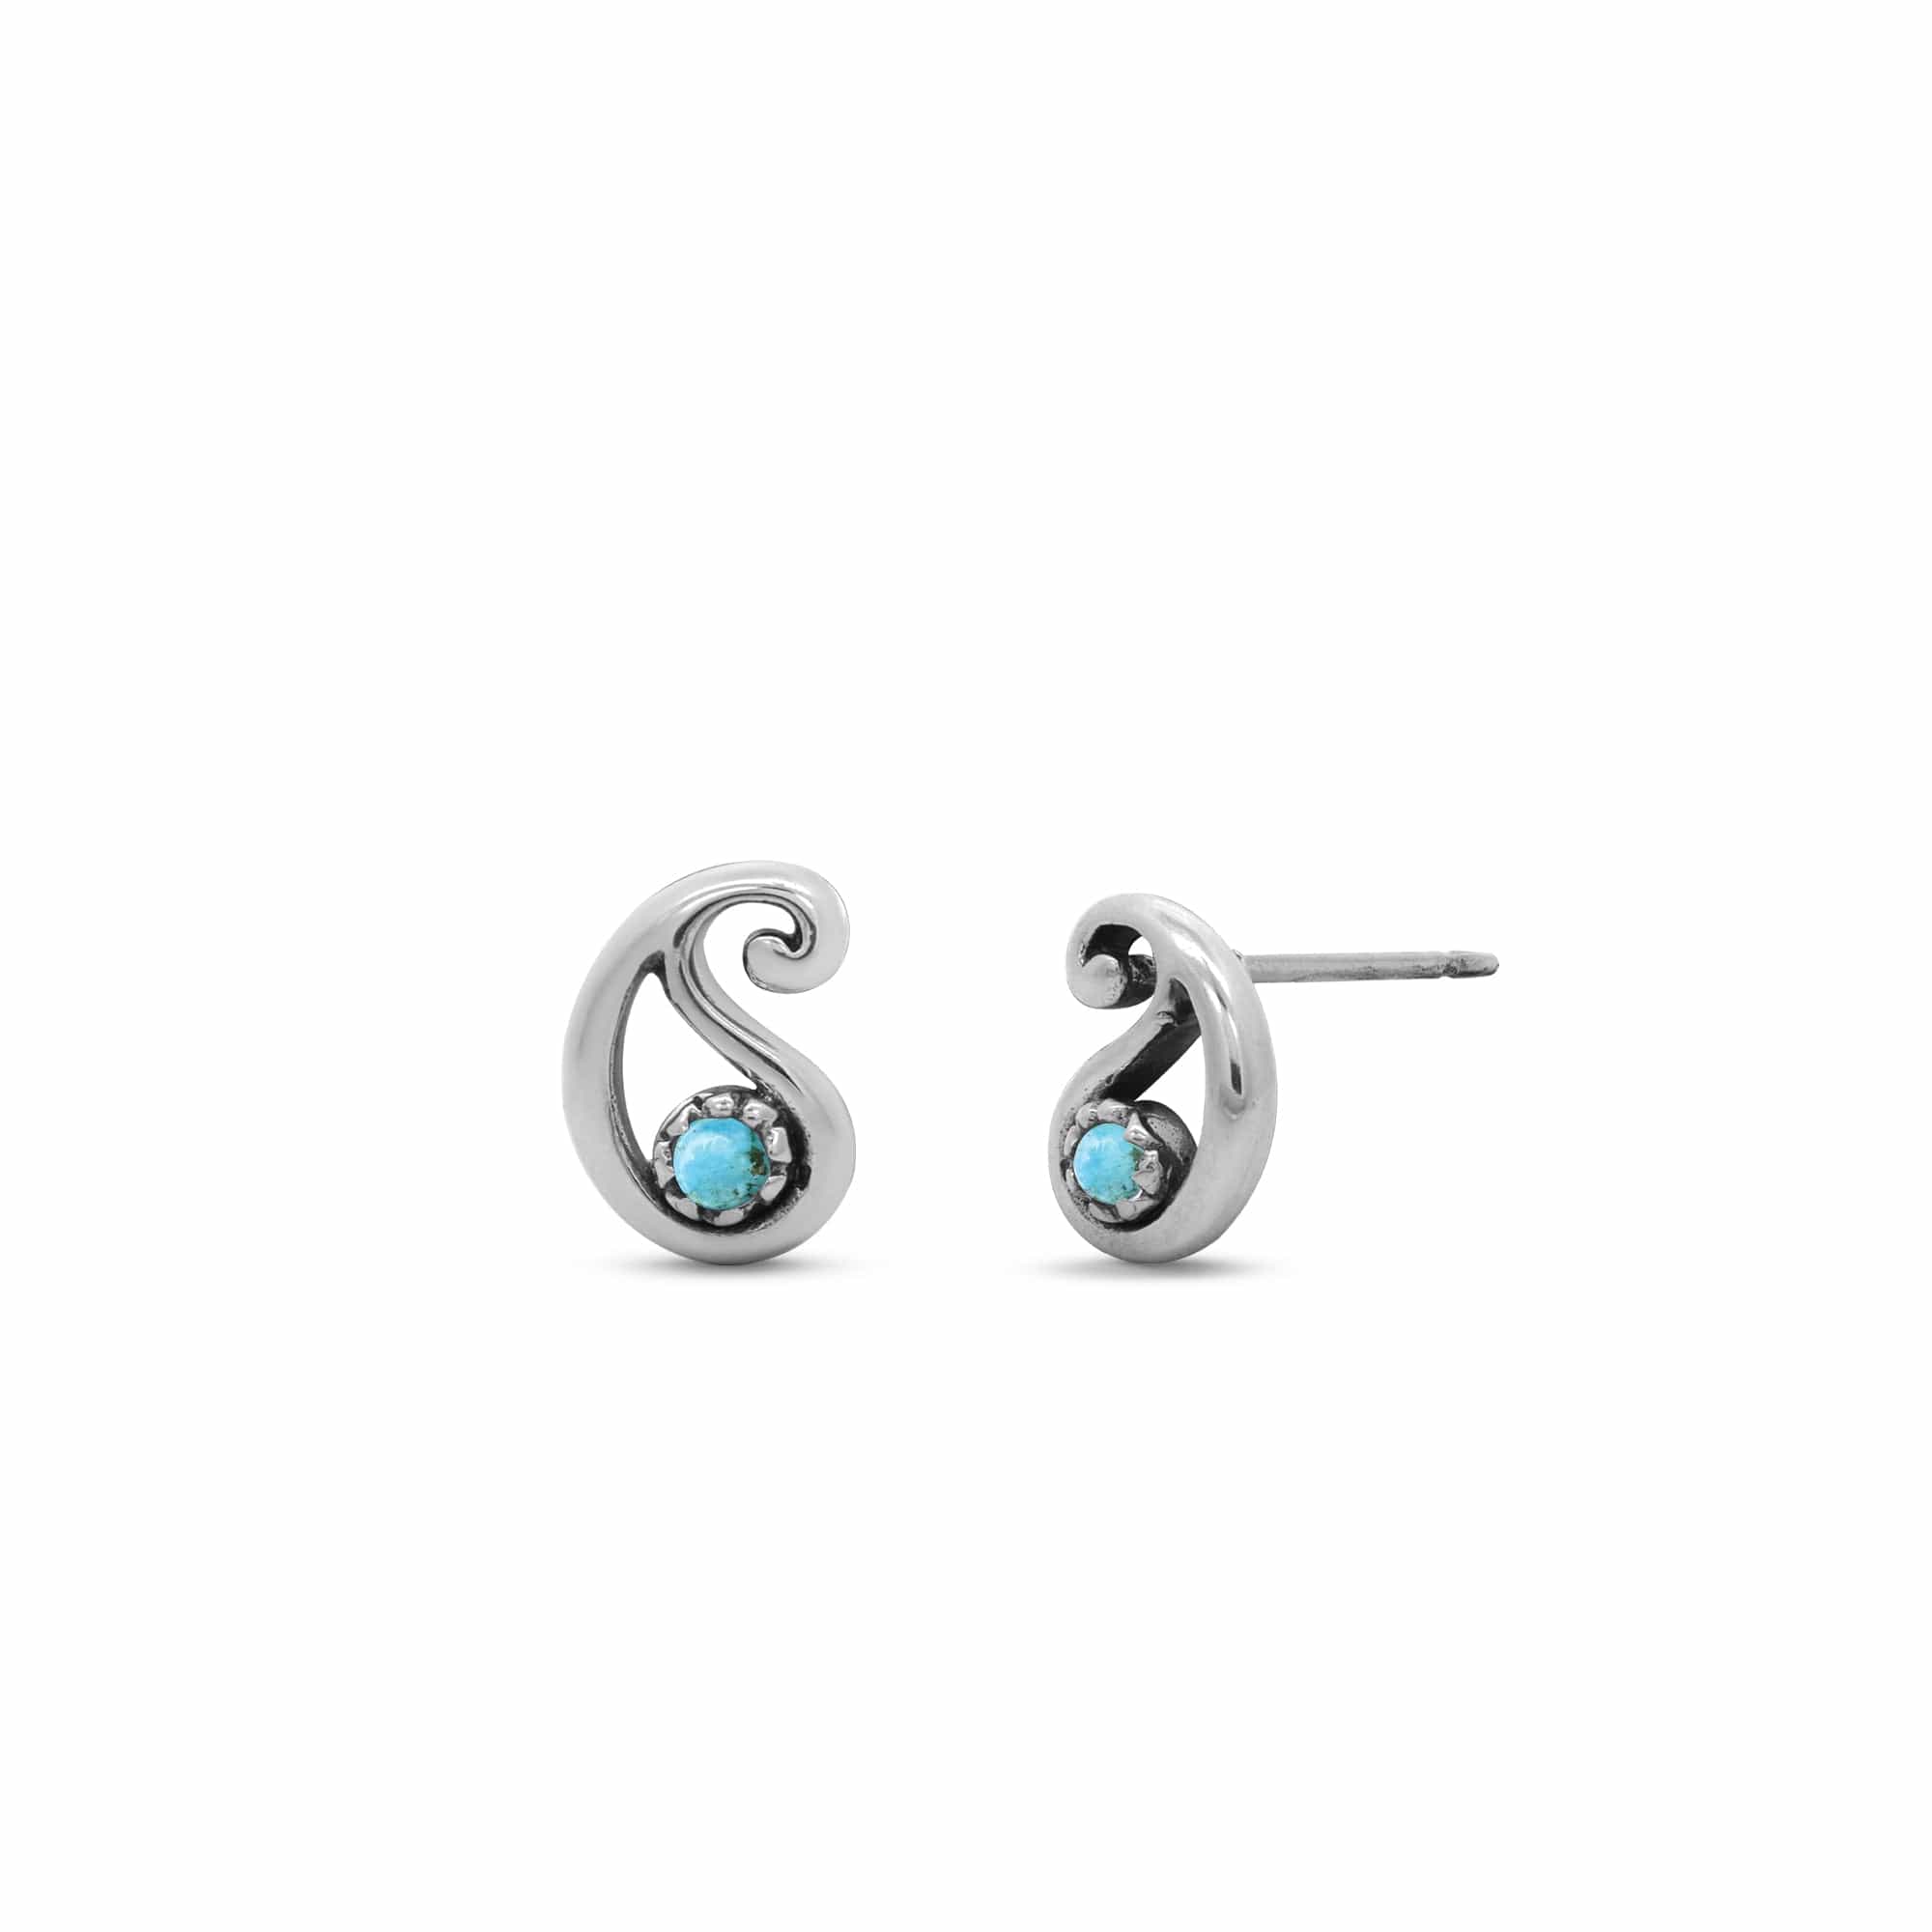 Boma Jewelry Paisly Bohemian Stud Earrings with Stone